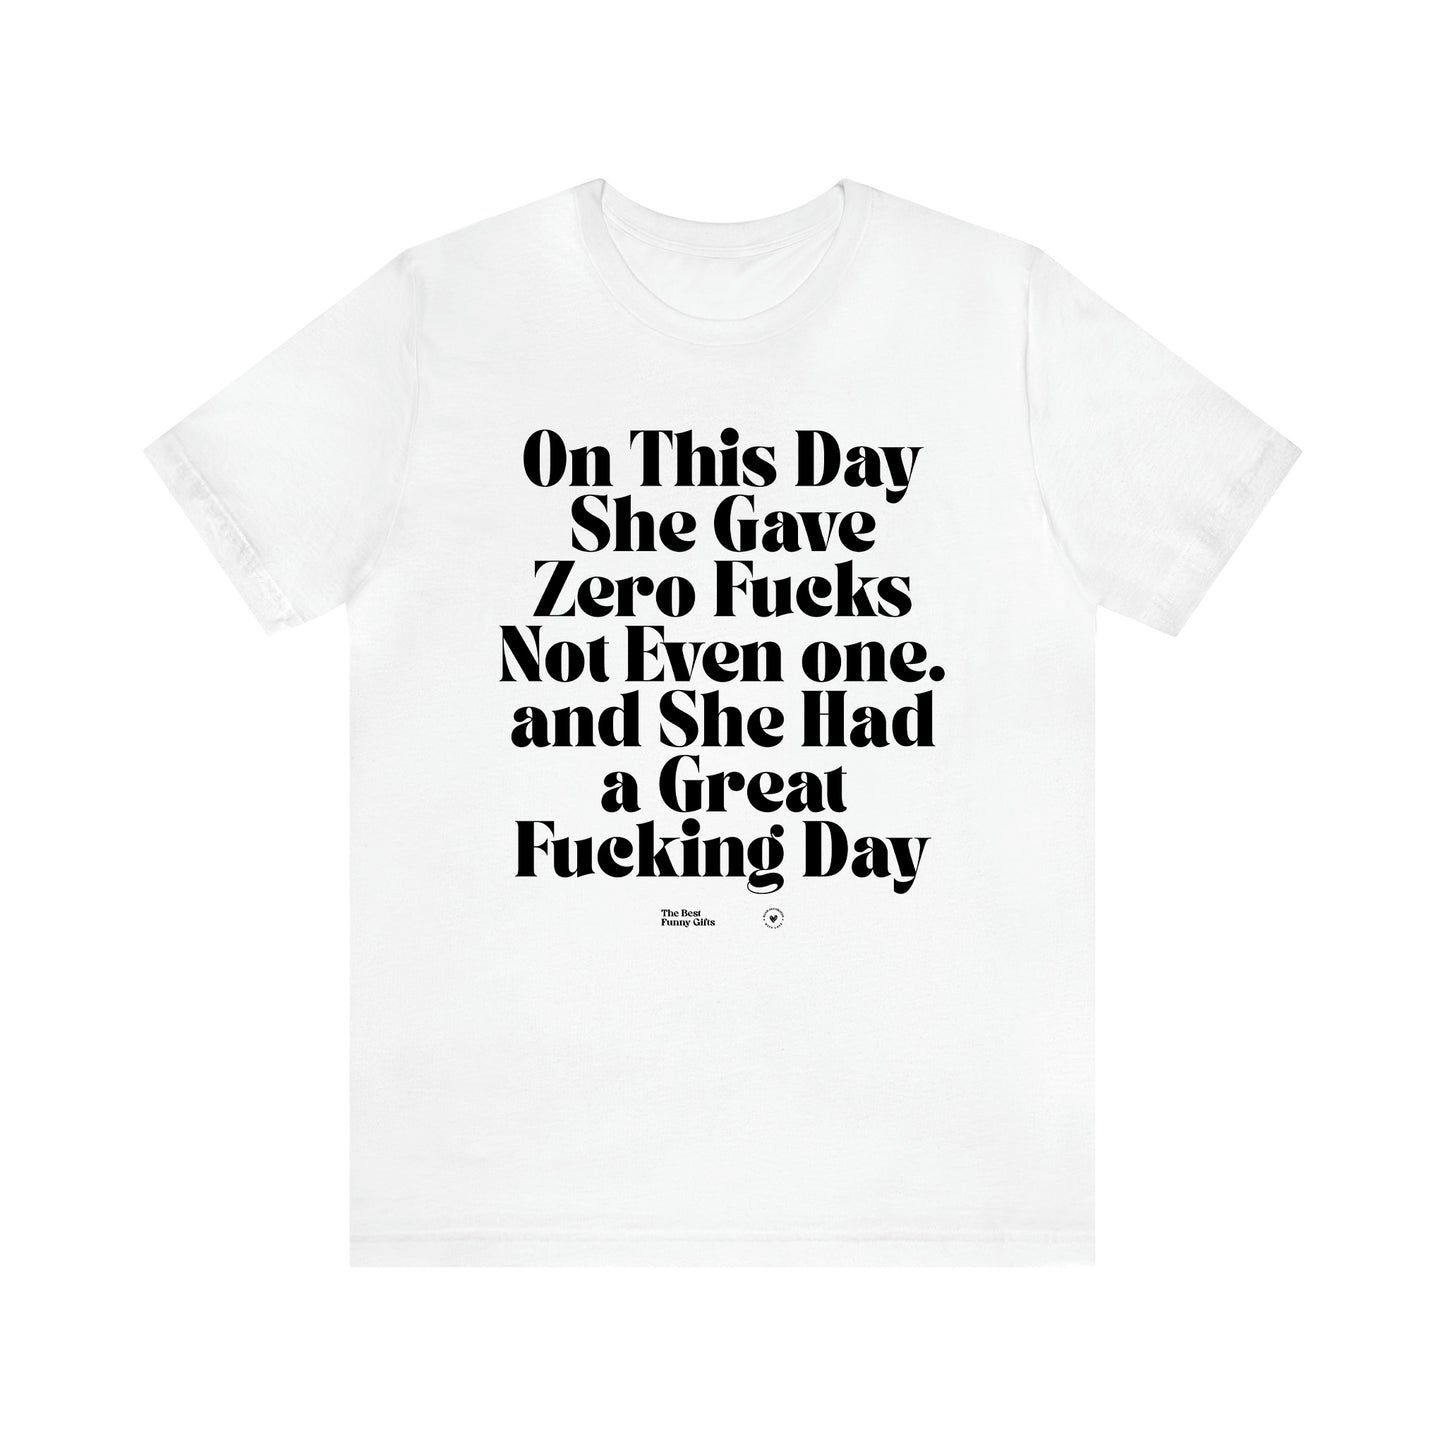 Women's T Shirts On This Day She Gave Zero Fucks Not Even One. And She Had a Great Fucking Day - The Best Funny Gifts